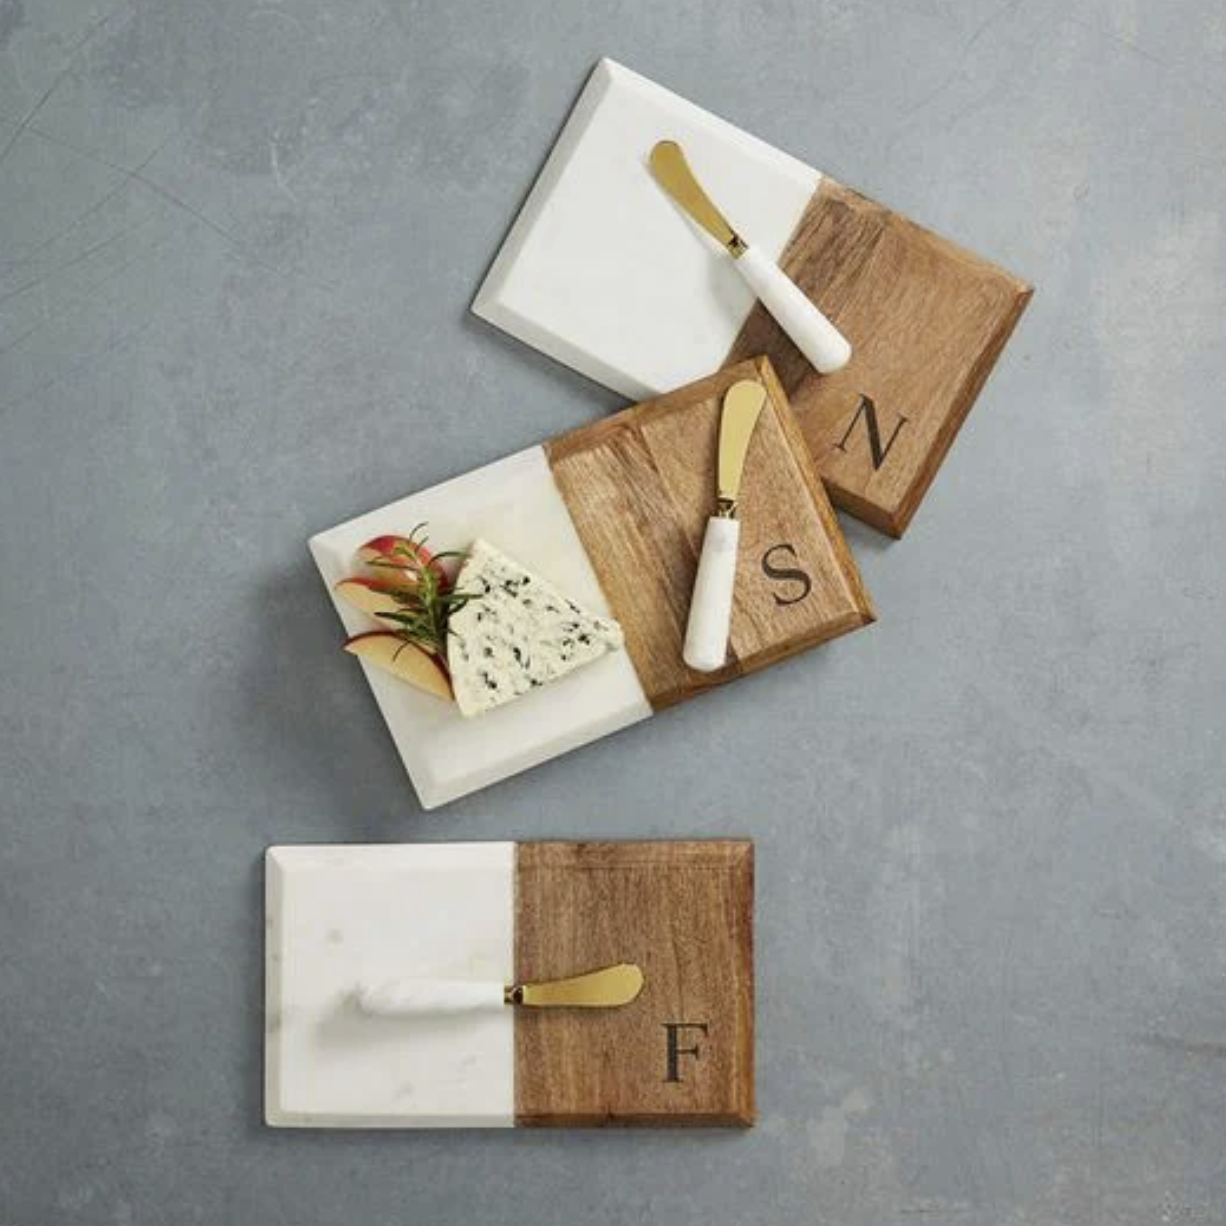 Rectangle Initial Wood & Marble Board